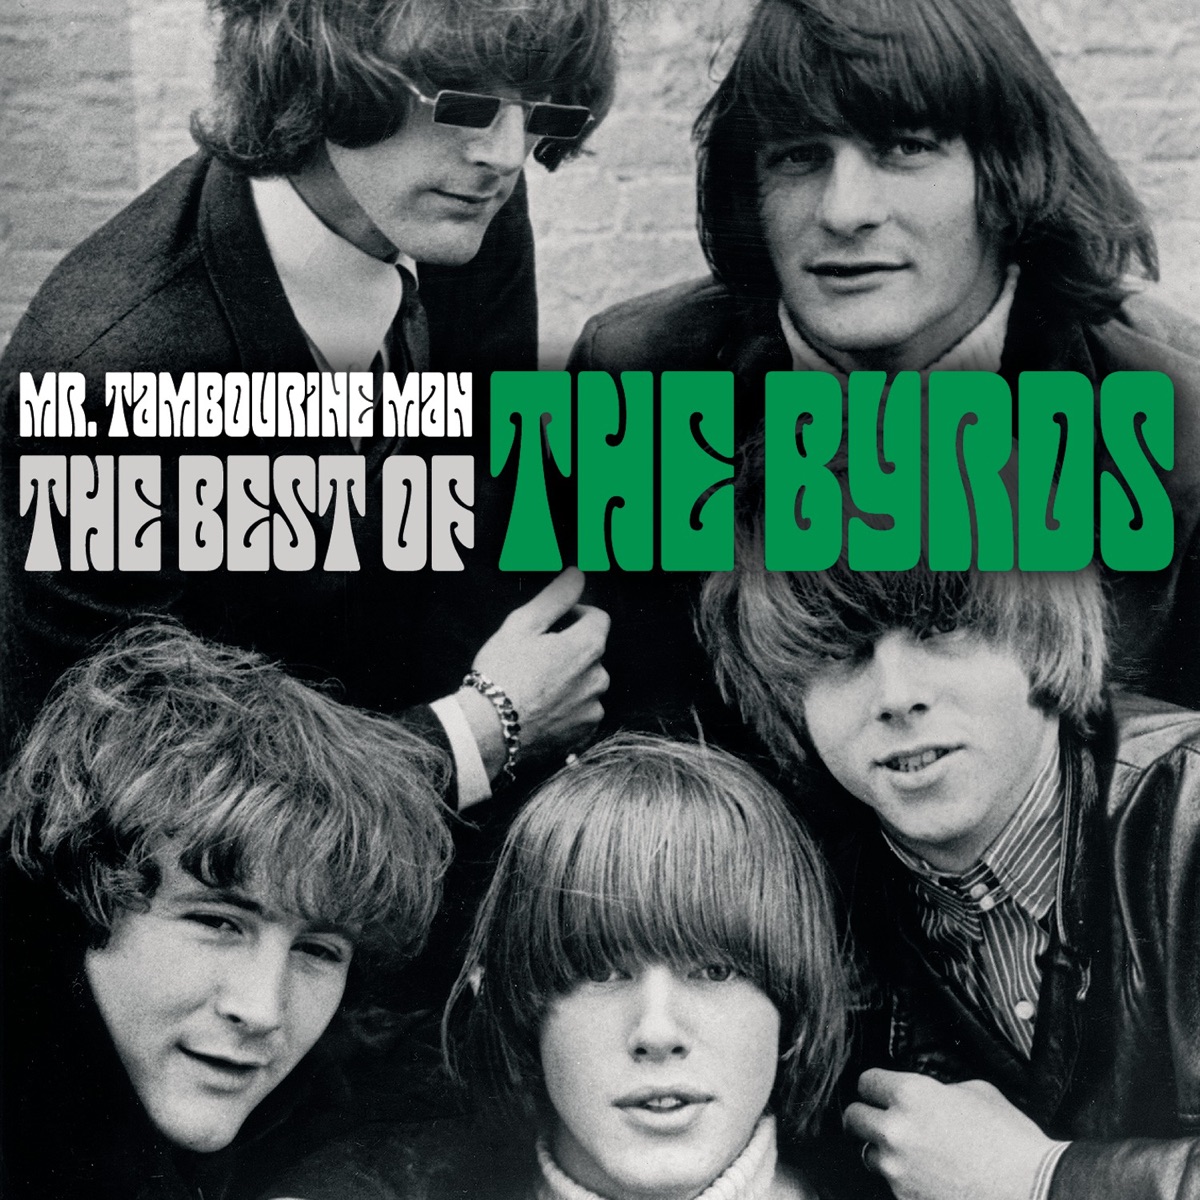 Mr. Tambourine Man - The Best of The Byrds - Album by The Byrds - Apple  Music